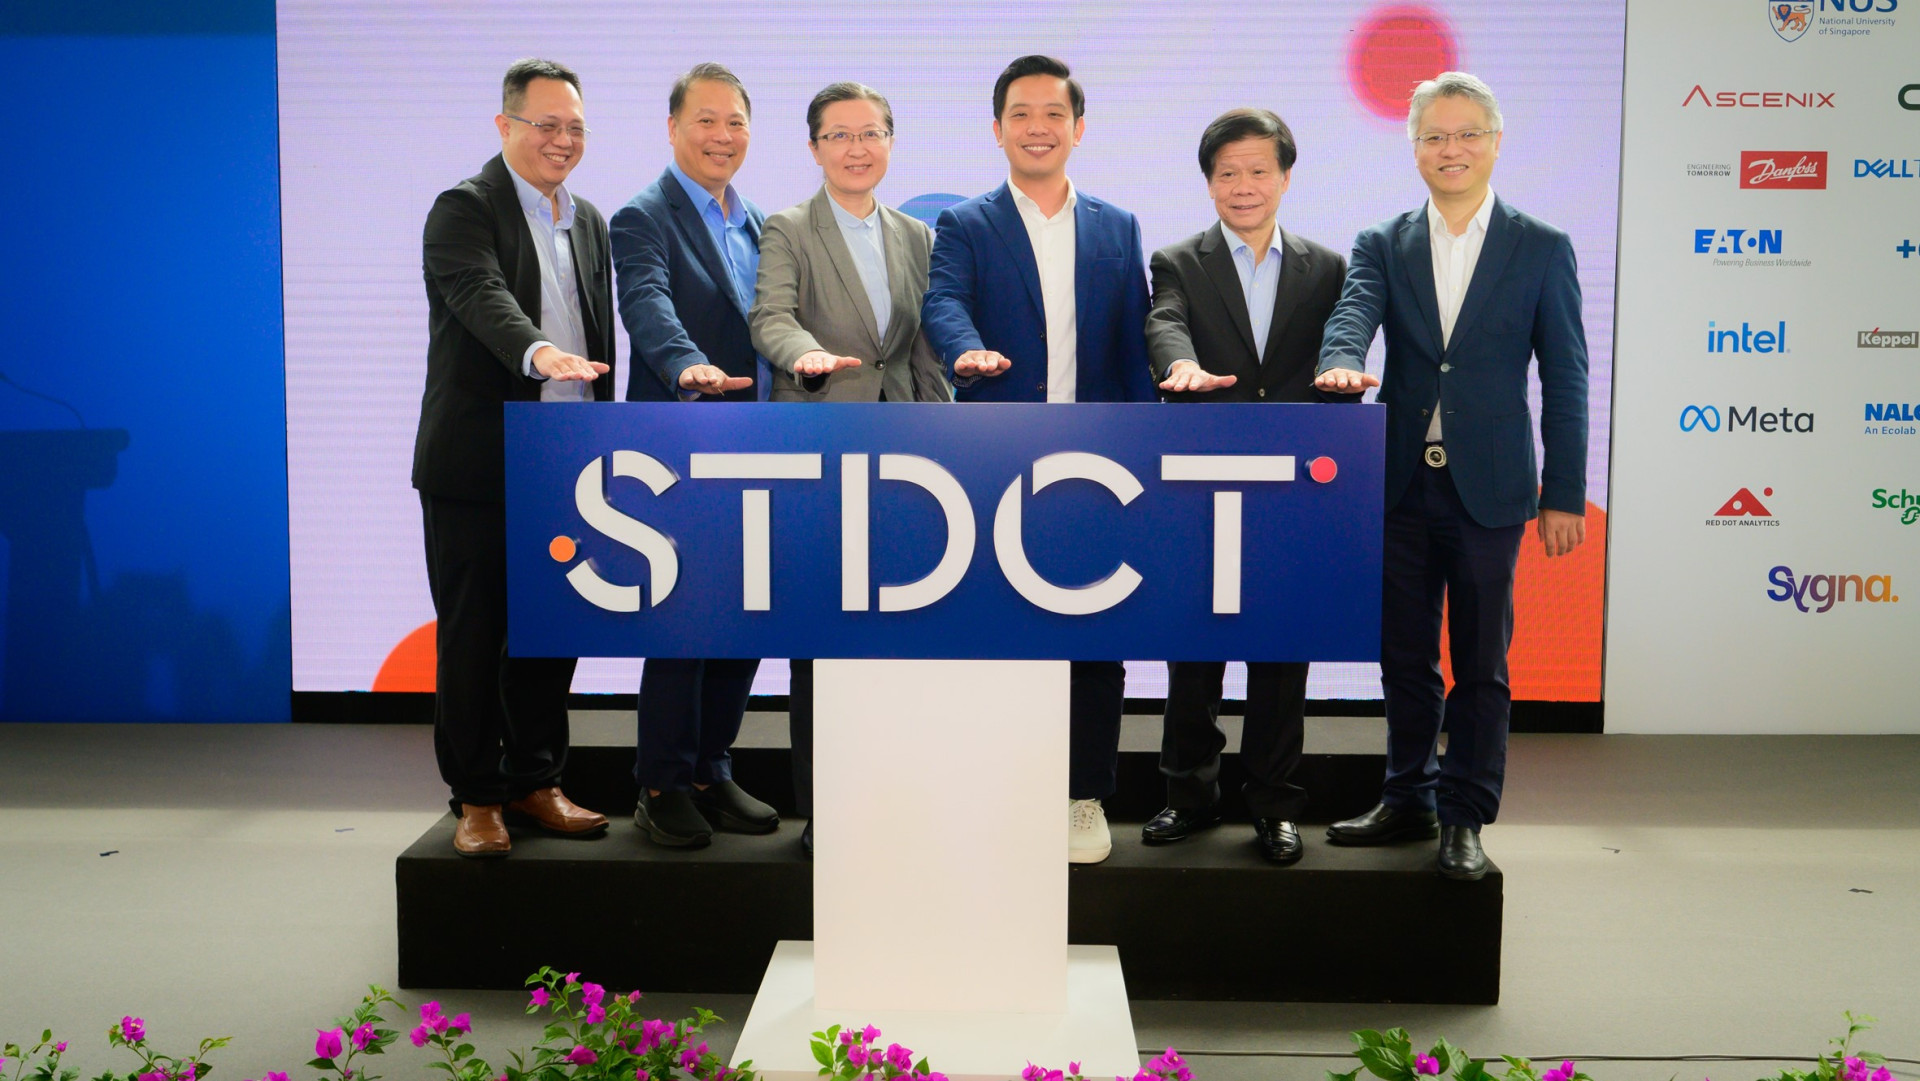 Minister of State for Trade and Industry Mr Alvin Tan (third from right) launched the Sustainable Tropical Data Centre Testbed (STDCT) at NUS. The STDCT is the first of its kind for the tropical environment. From left to right: Associate Professor Lee Poh Seng, STDCT Programme Director, Professor Teo Kie Leong, NUS College of Design and Engineering then Acting Dean, Professor Liu Bin, NUS Deputy President (Research and Technology), Mr Alvin Tan, Minister of State for Trade and Industry, Professor Lam Khin Yong, NTU Vice President (Industry), Professor Wen Yonggang, STDCT Programme Co-Director.